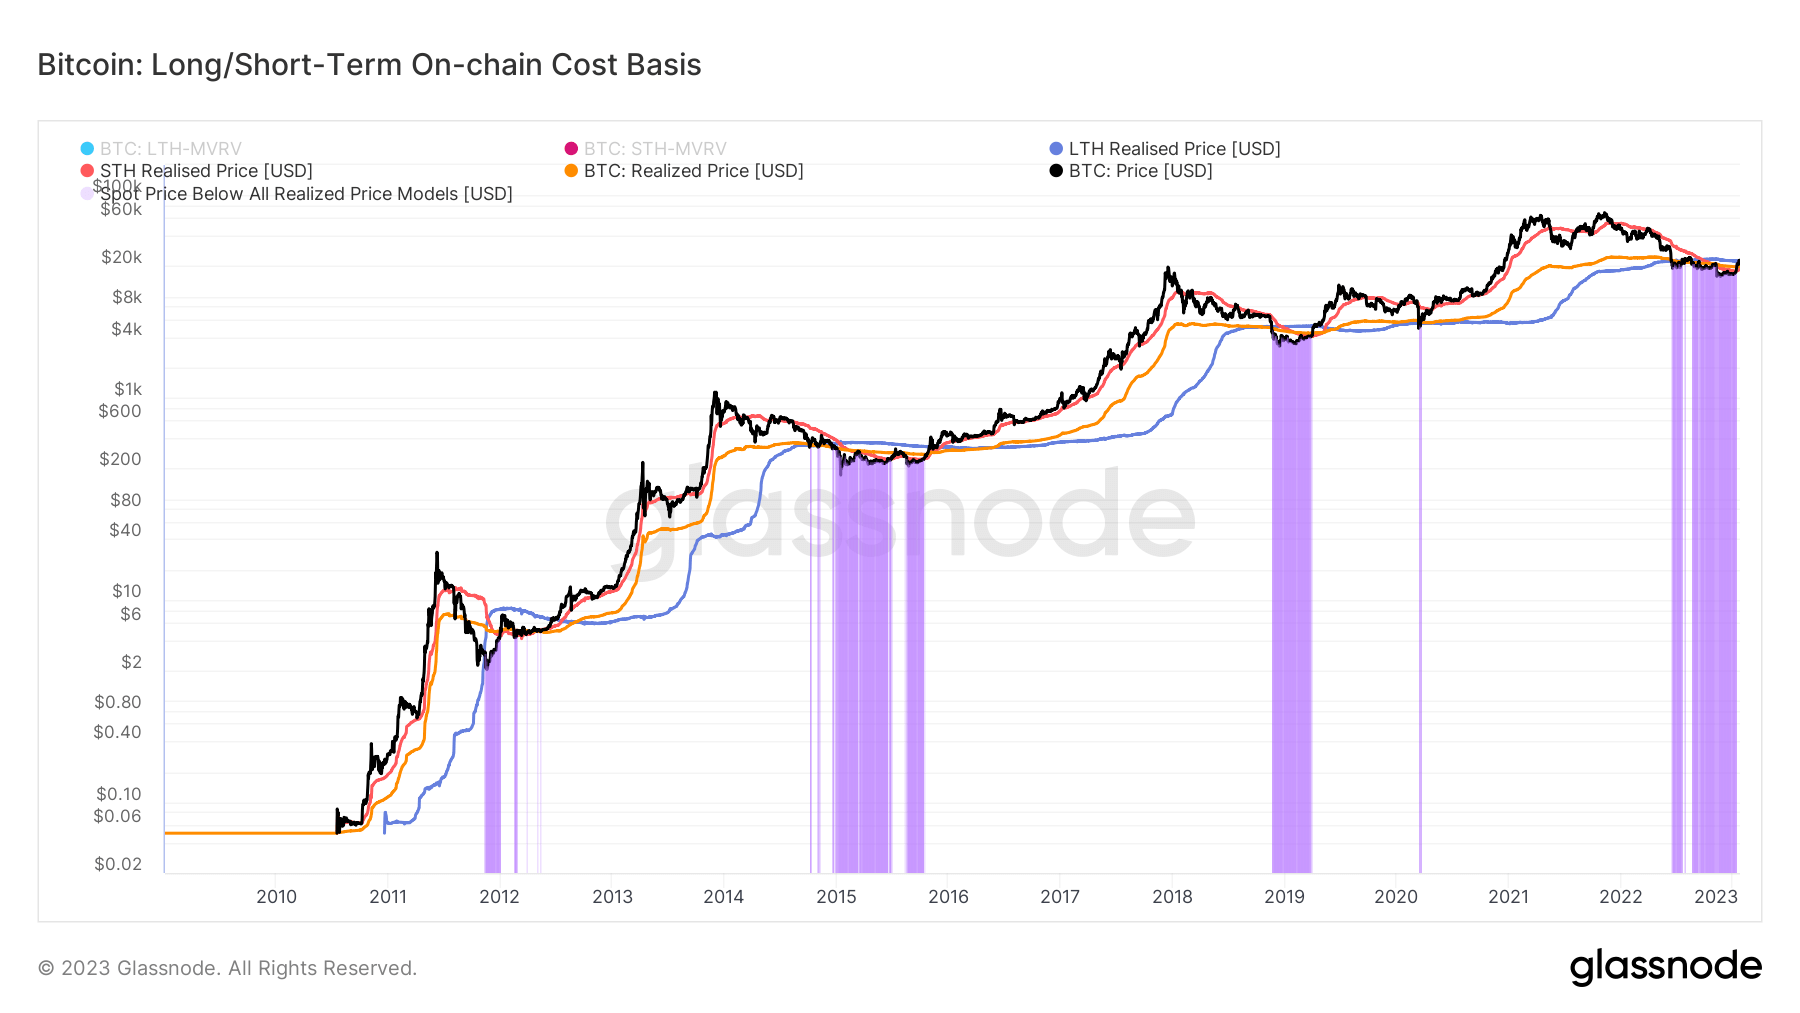 On-Chain cost basis: (Source: Glassnode)